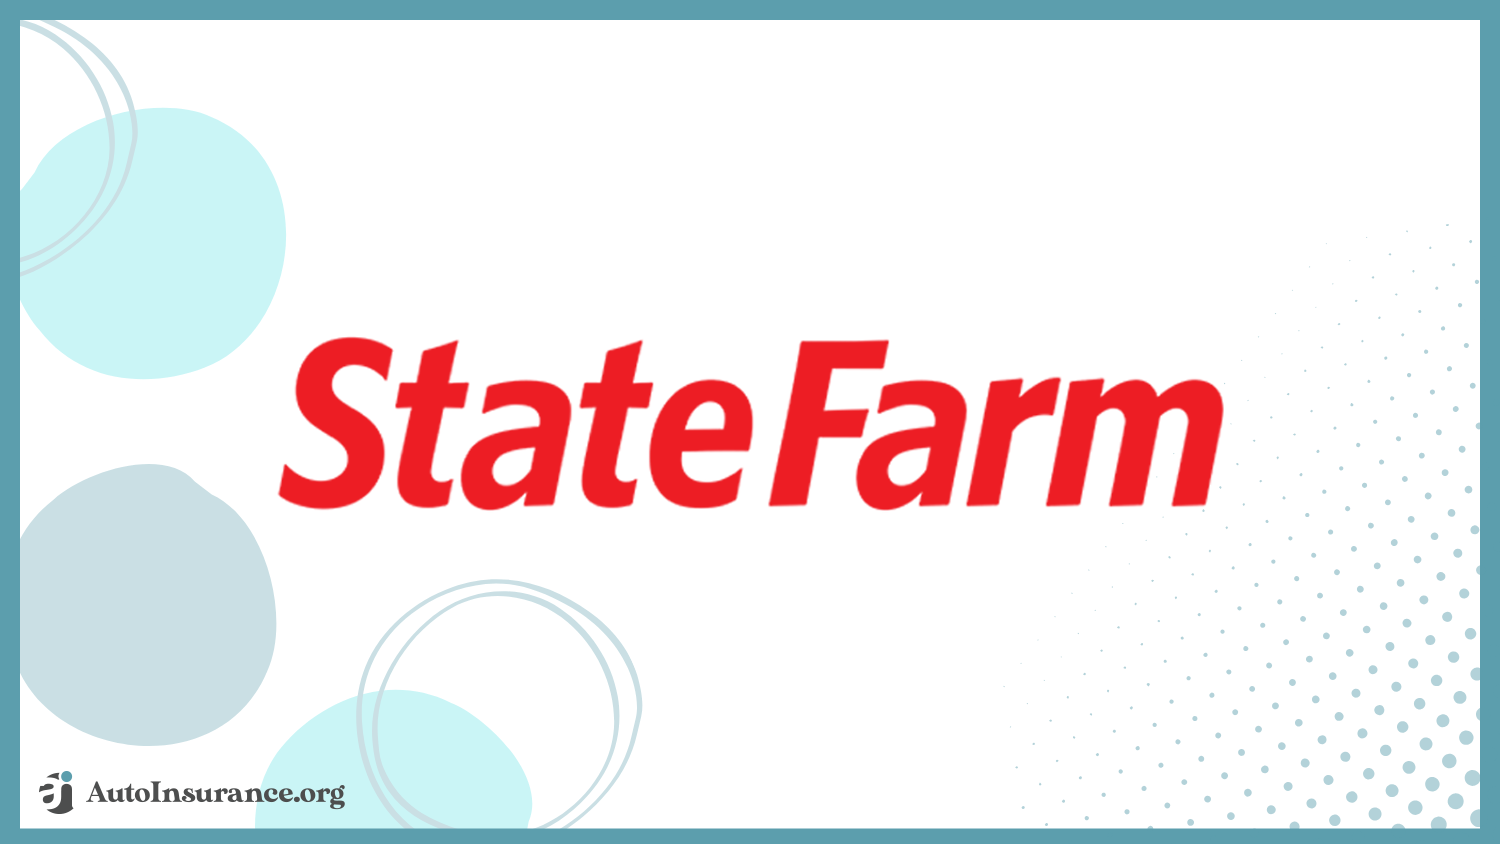 State Farm: Best Auto Insurance for Impaired Drivers